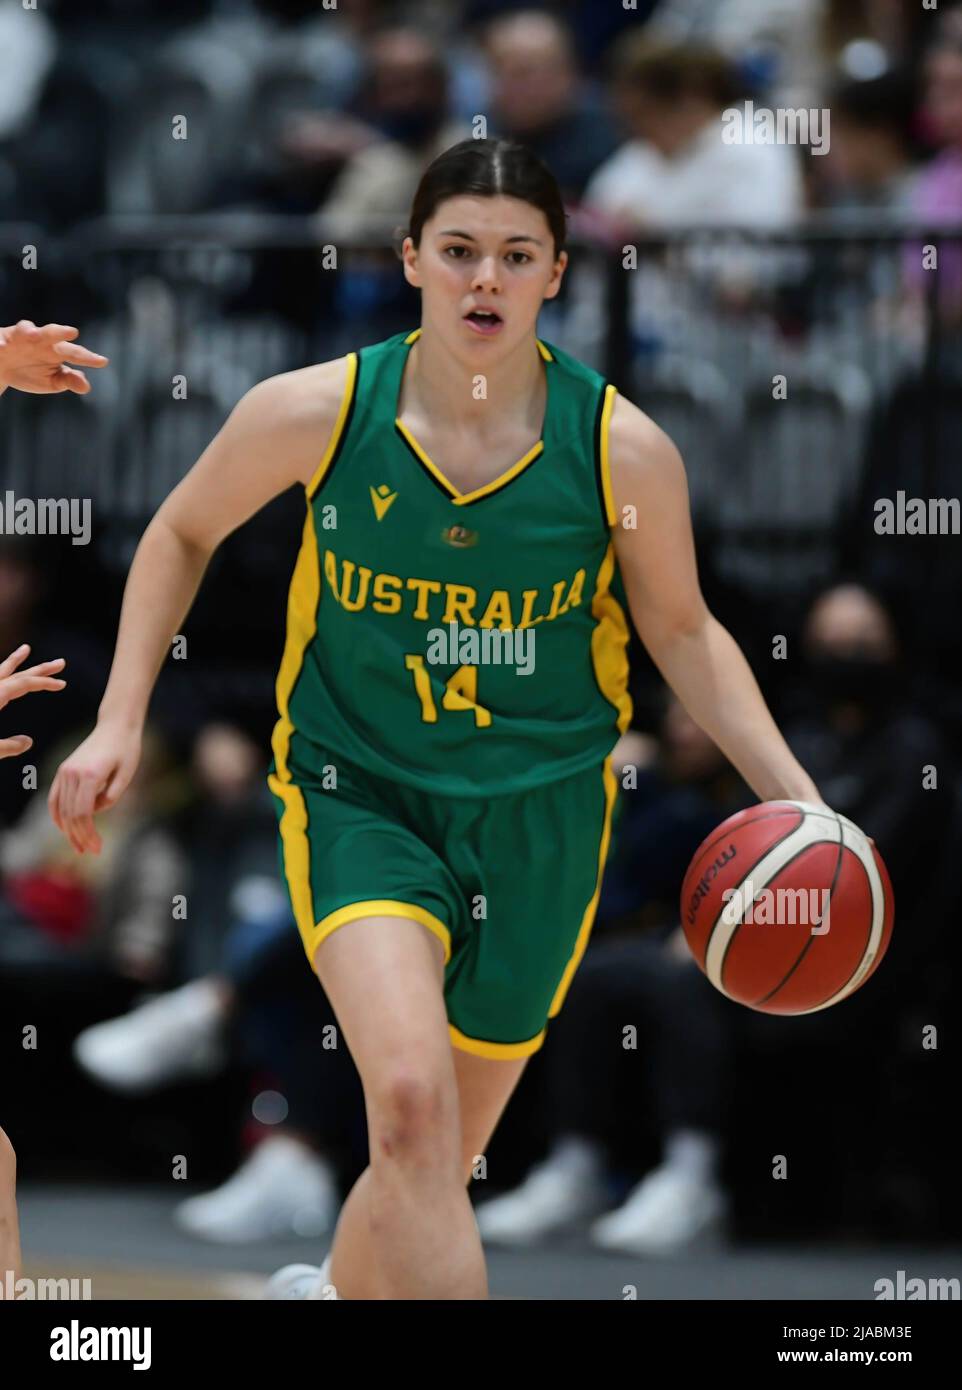 Sydney, Australia. 29th May, 2022. Jade Melbourne of Australia Women's  Basketball Team seen in action during Game 2 of the Friendly International  Women Series match between Australia Women's Basketball Team and Japan